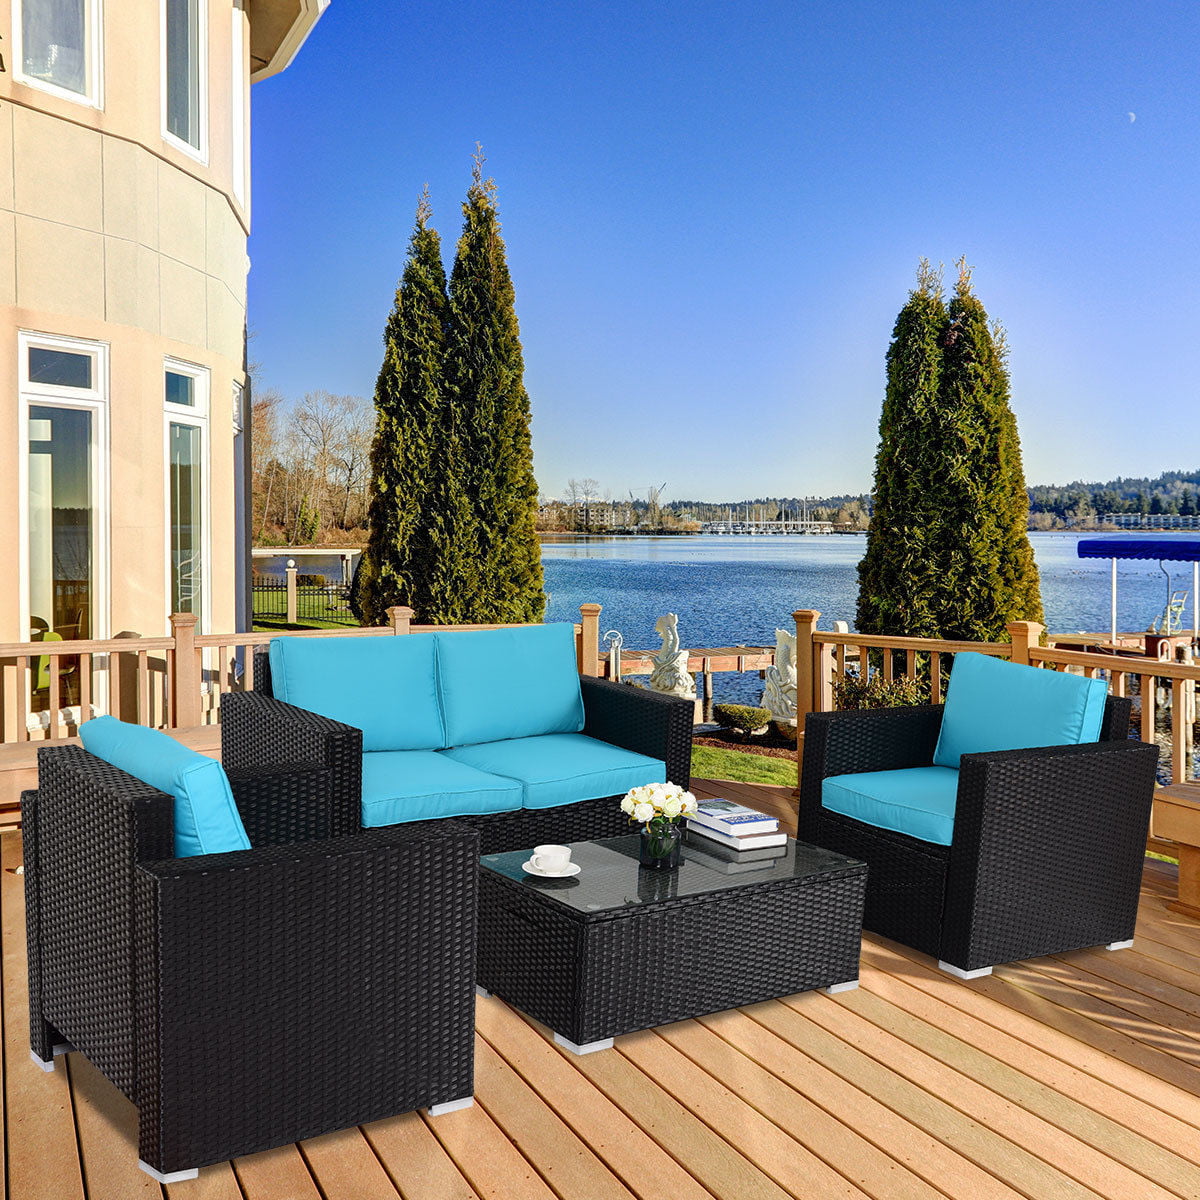 Gymax 4 Piece Rattan Patio Furniture Set Outdoor Rattan Wicker with